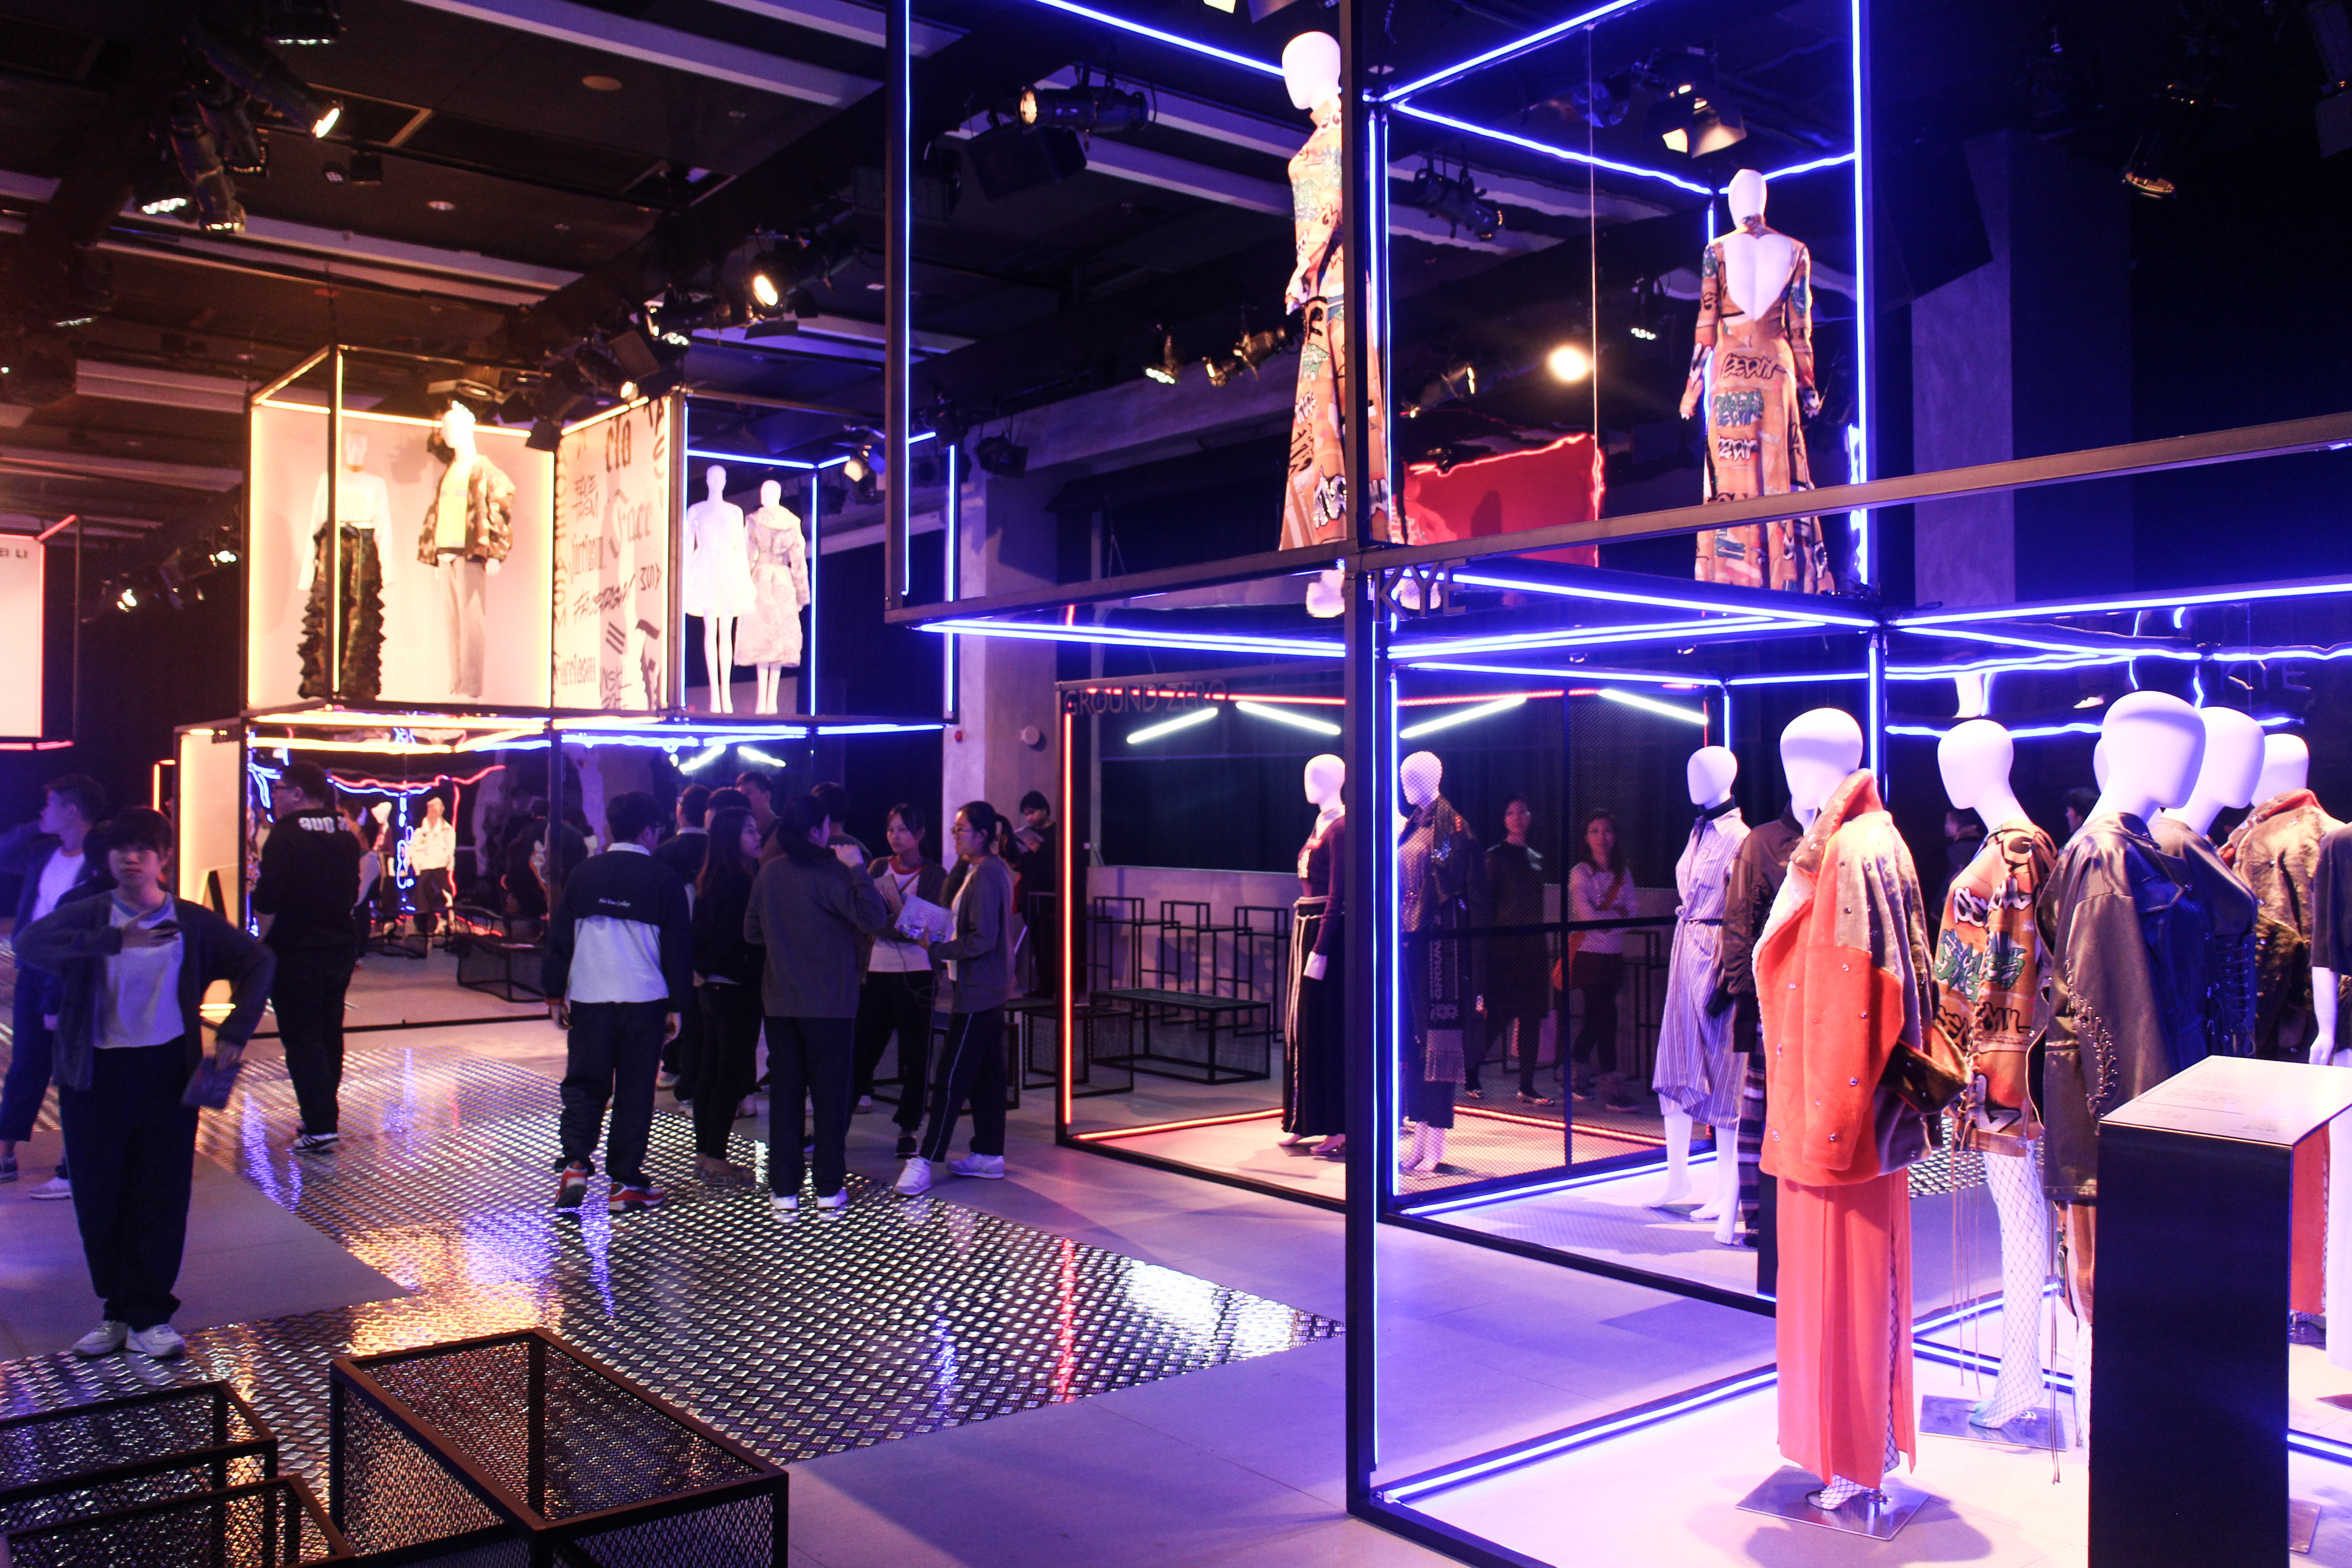 The ‘10 Asian Designers to Watch’ exhibition organized by Hong Kong Design Centre (HKDC), Photo by Wasawat Dechapirom